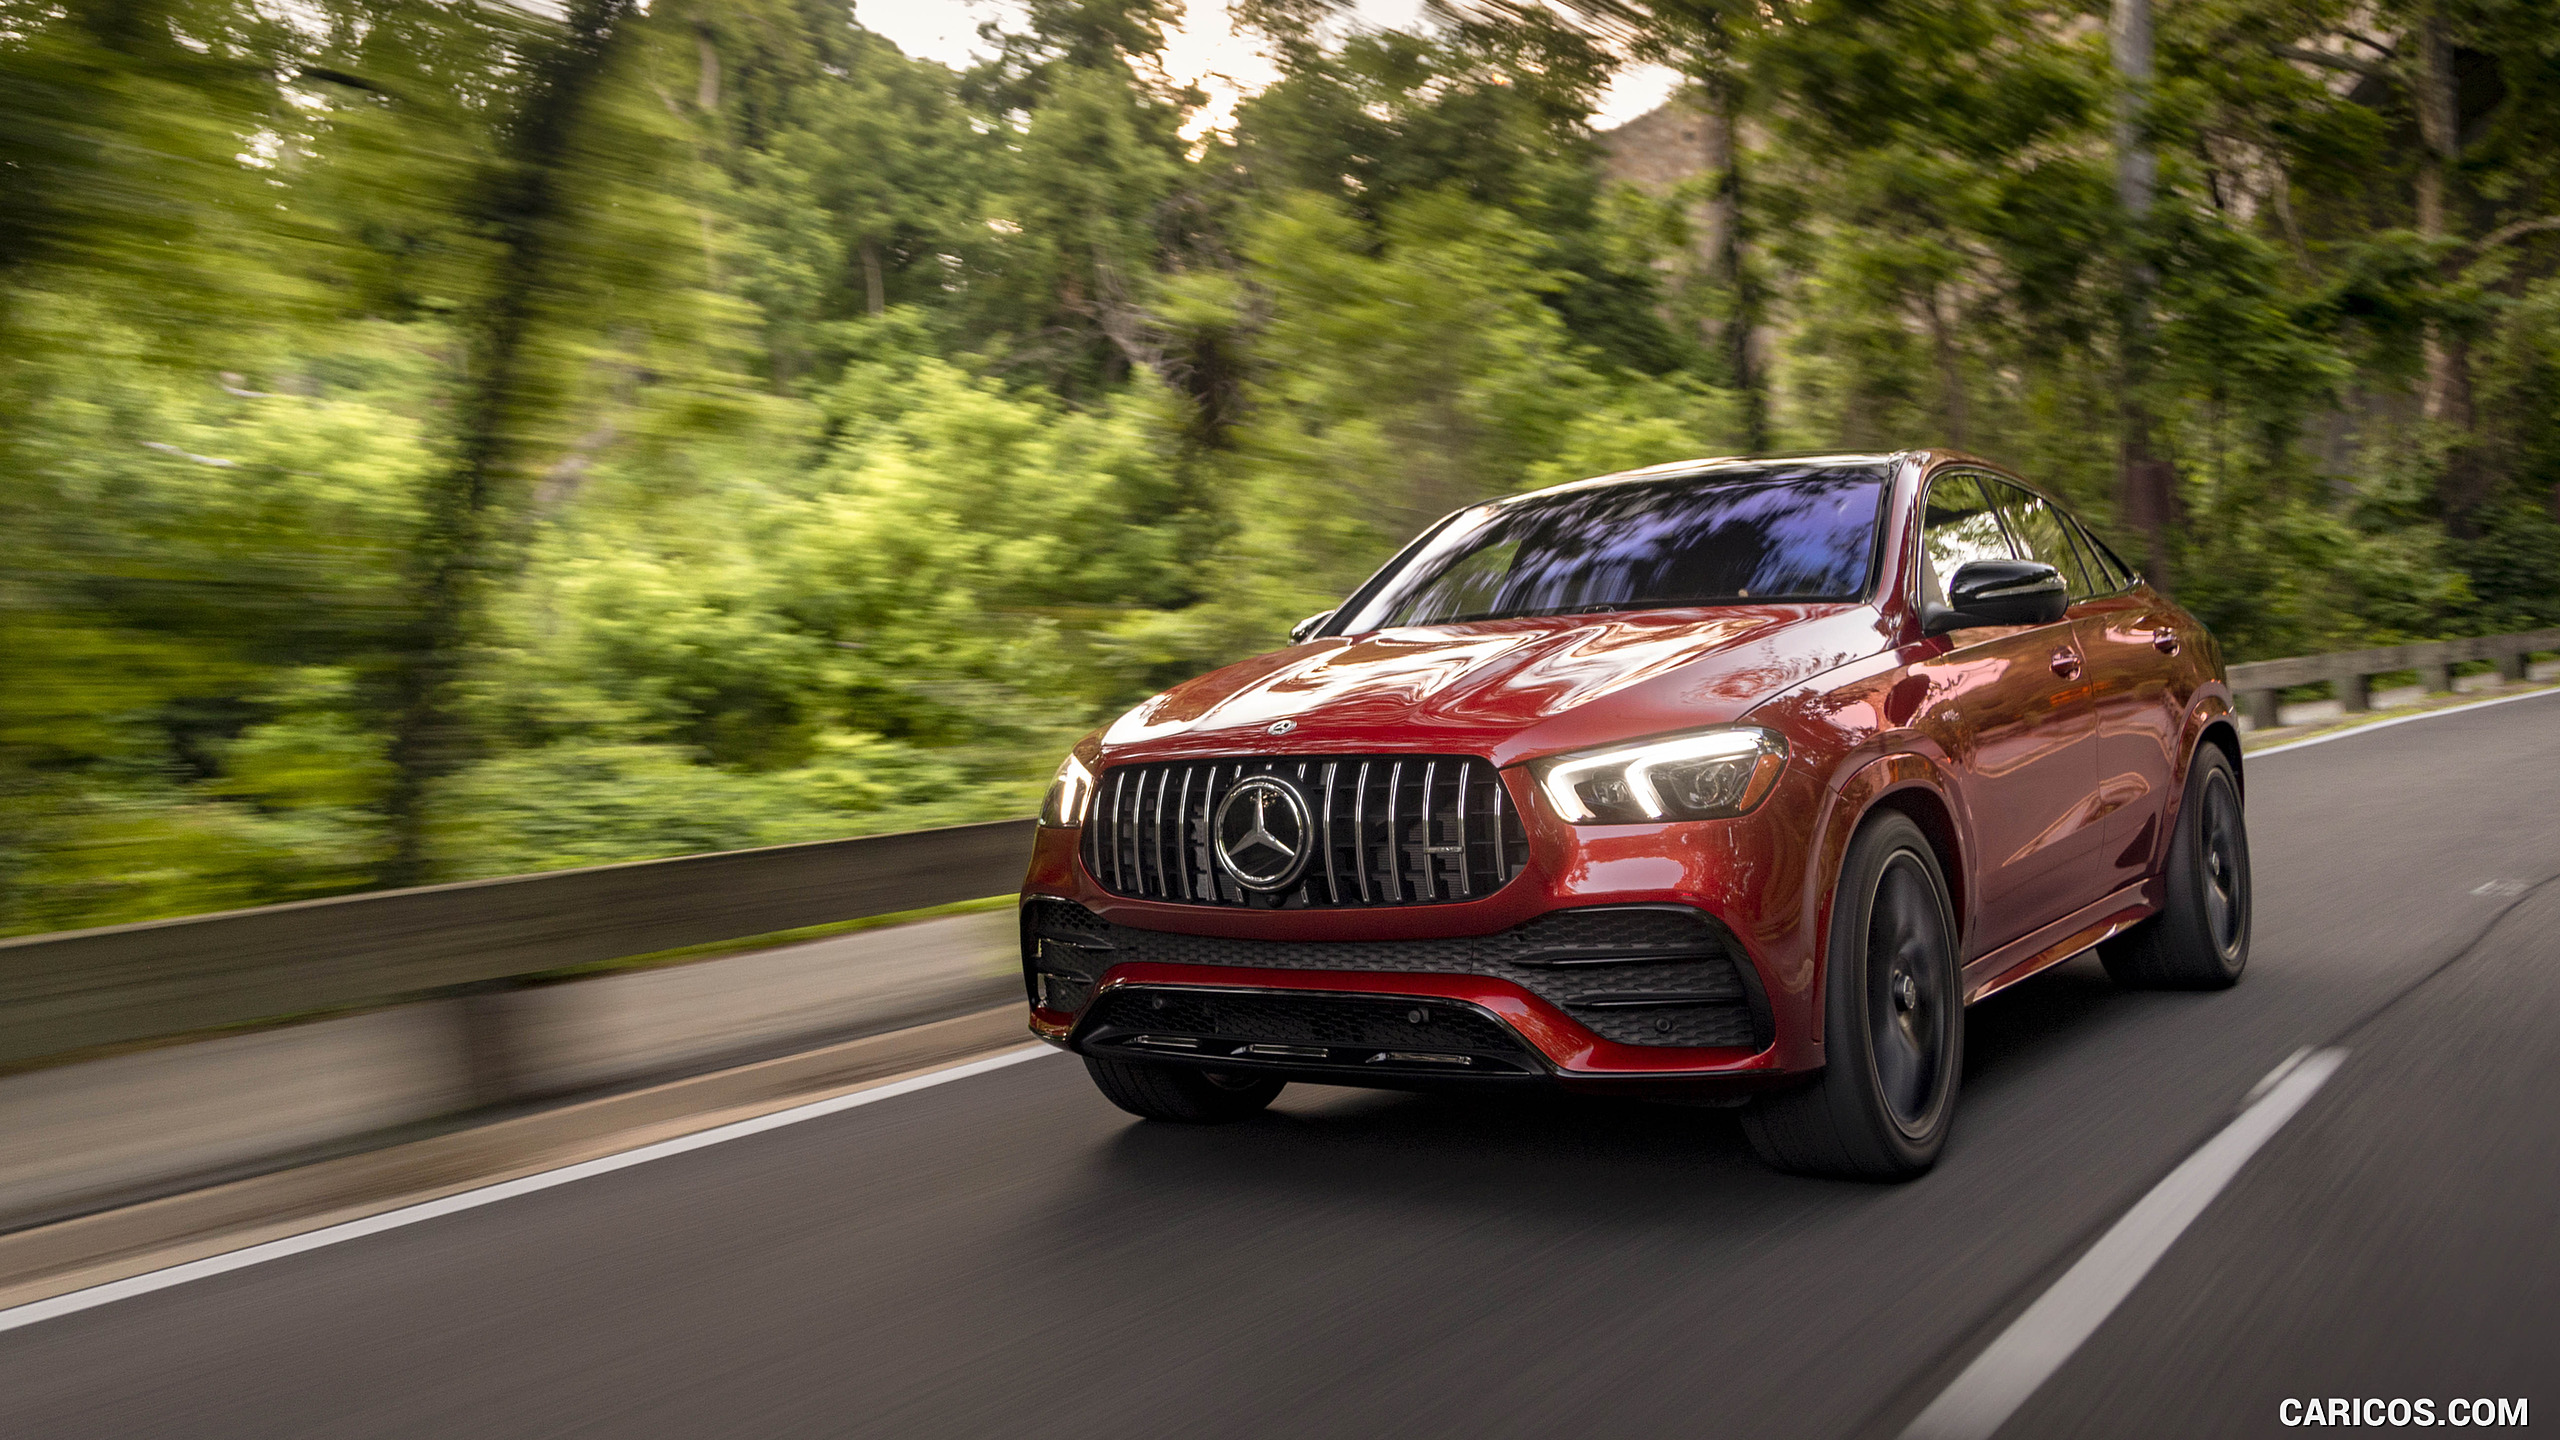 2021 Mercedes-AMG GLE 53 Coupe - Front Three-Quarter, #105 of 178